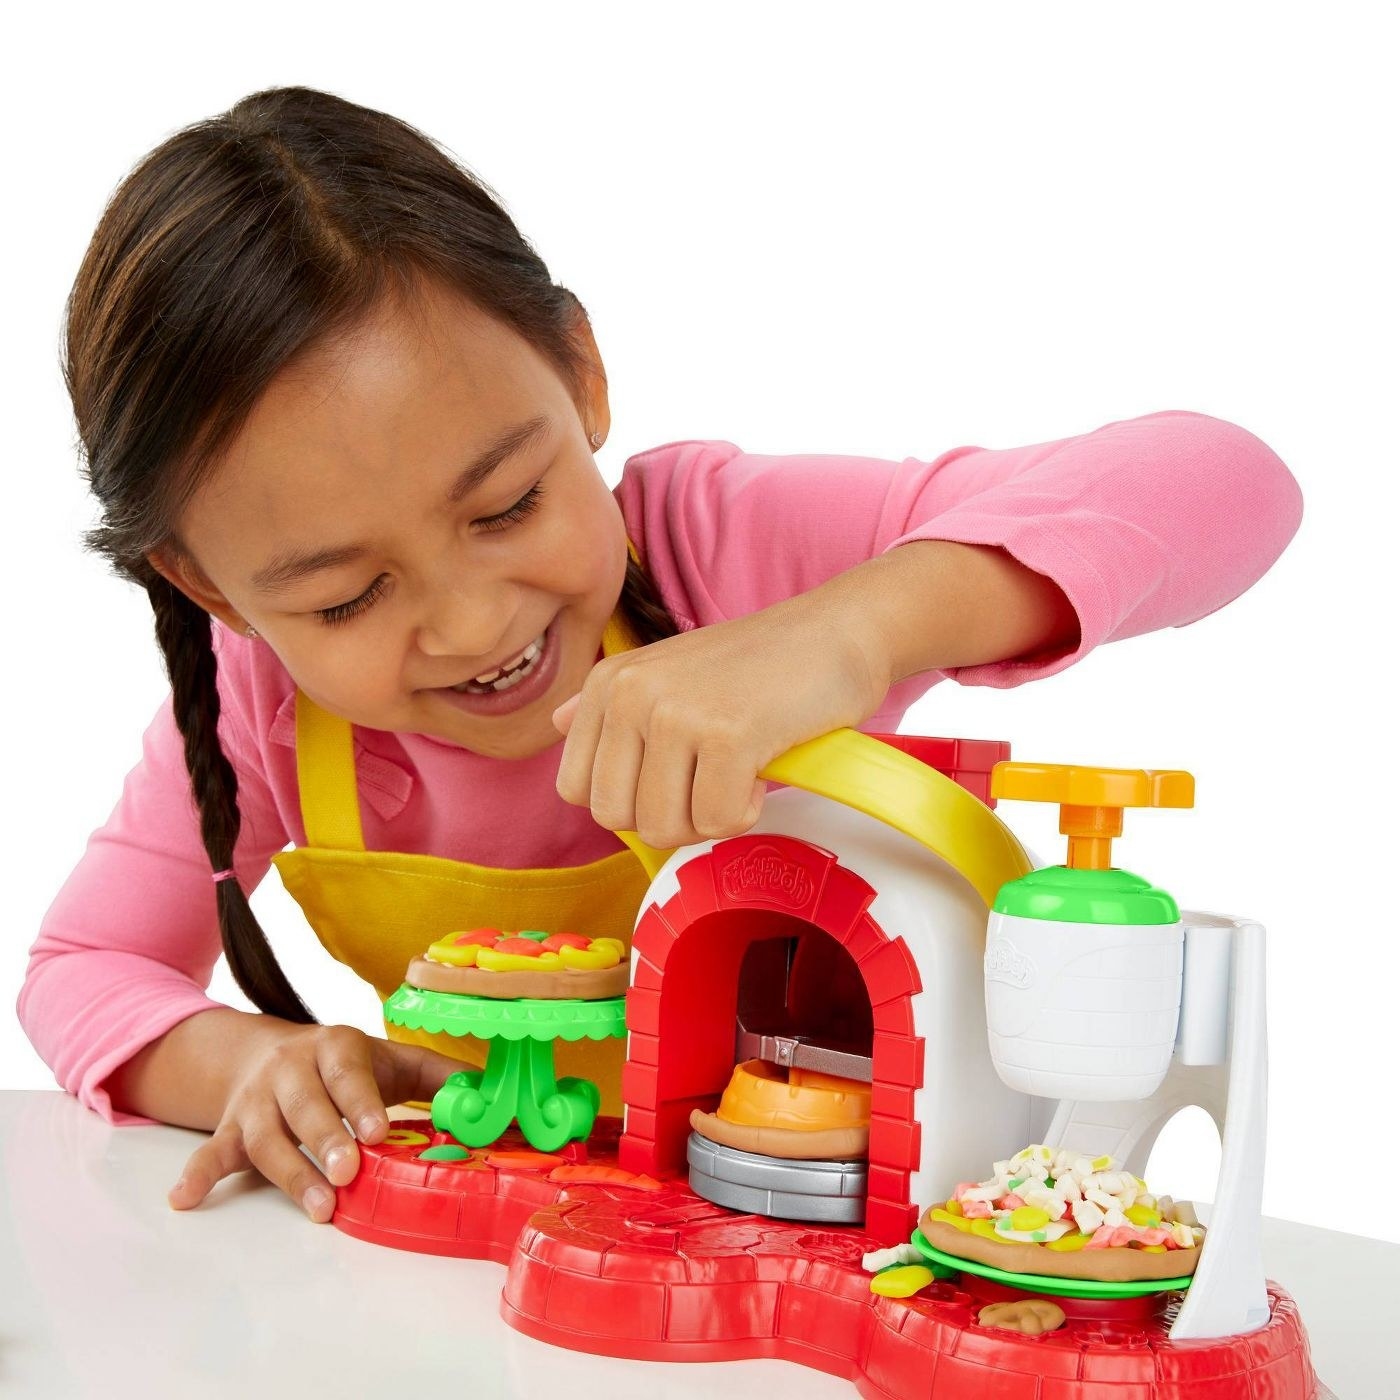 Kid playing with playdoh pizza oven